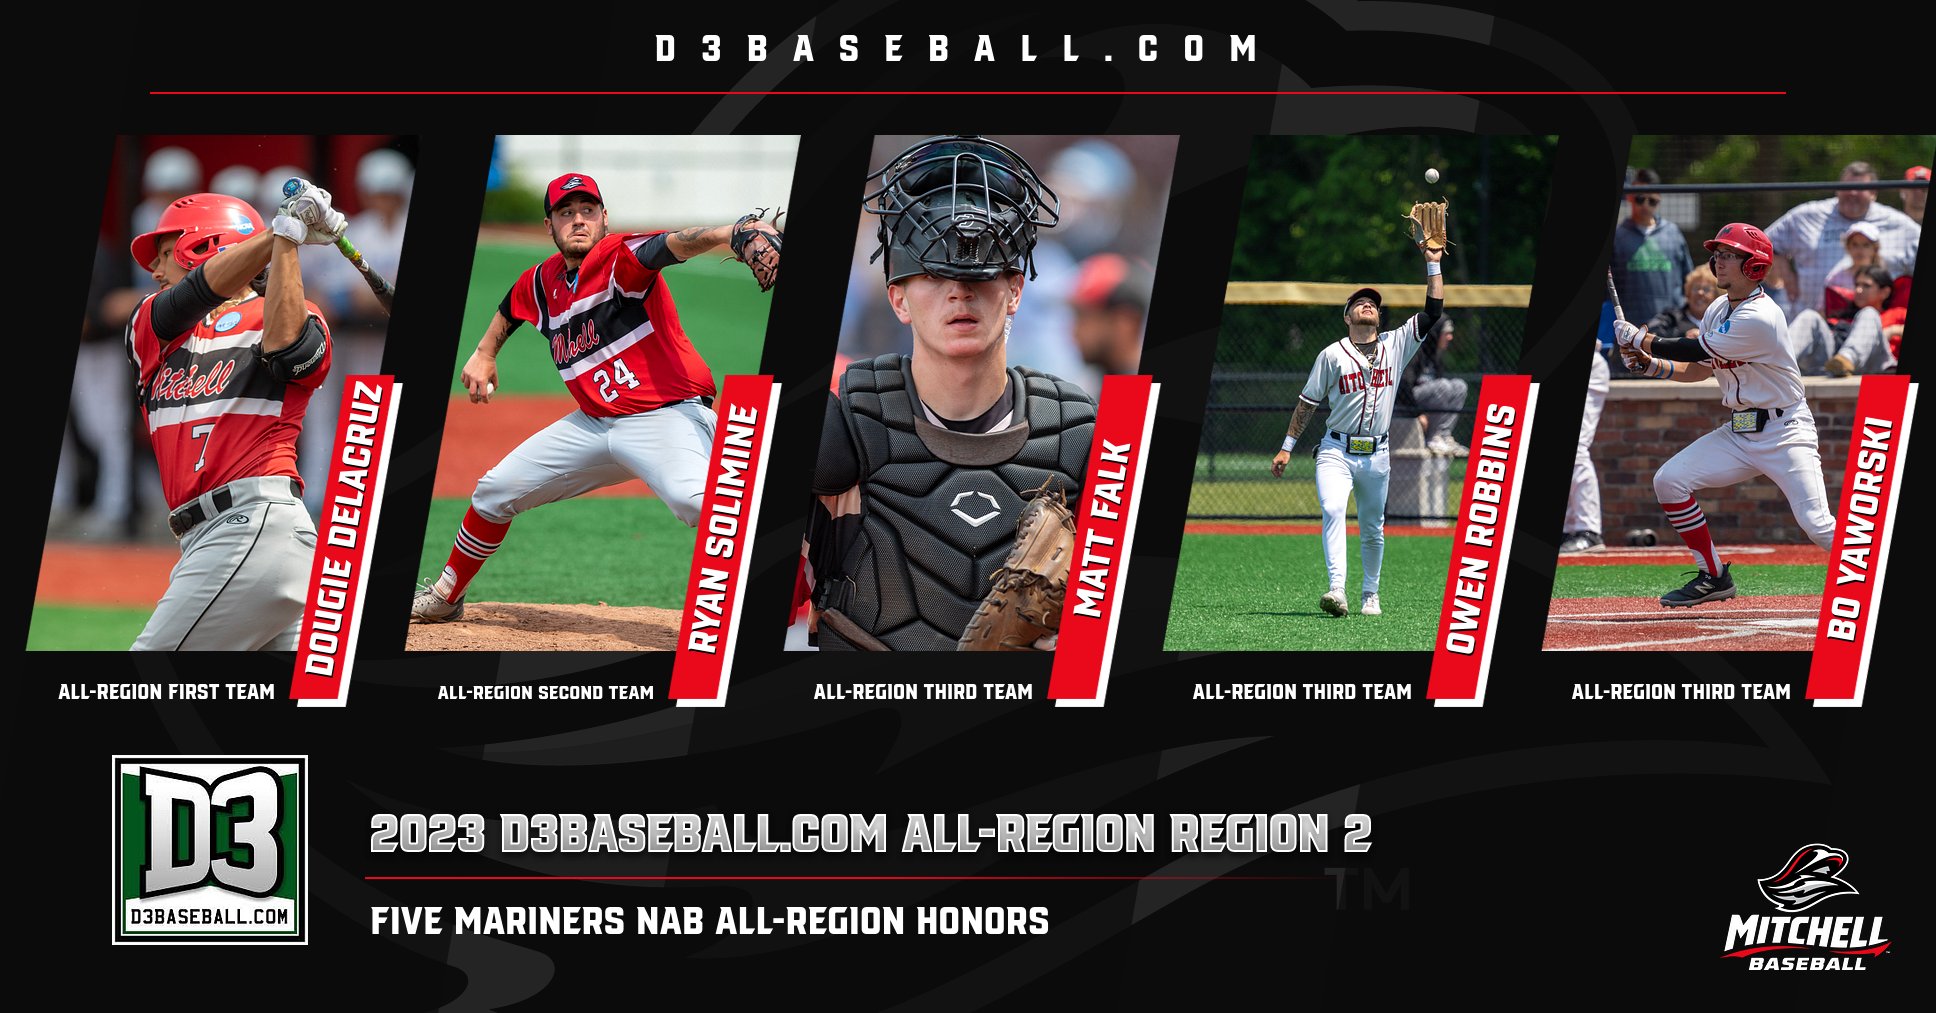 Five Mariners Earn All-Region Honors from D3baseball.com